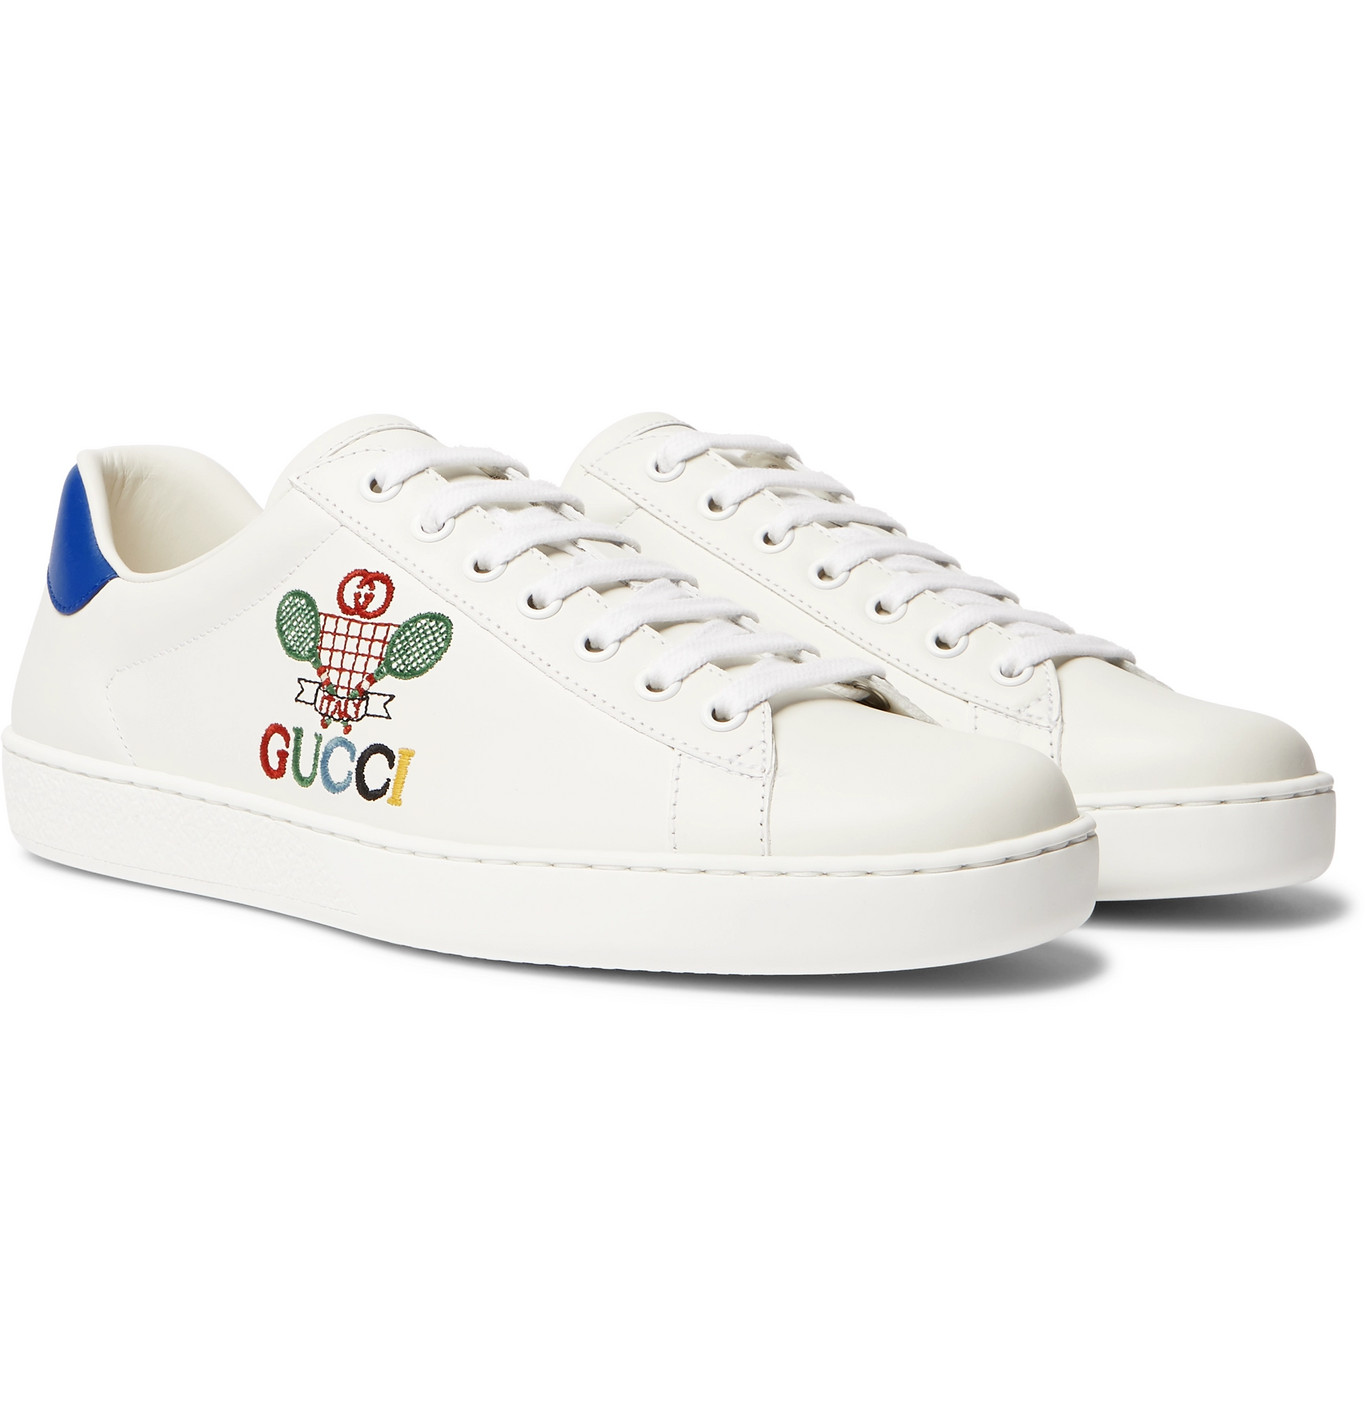 Gucci - New Ace Logo-Embroidered Leather Sneakers - Men - White | The ...